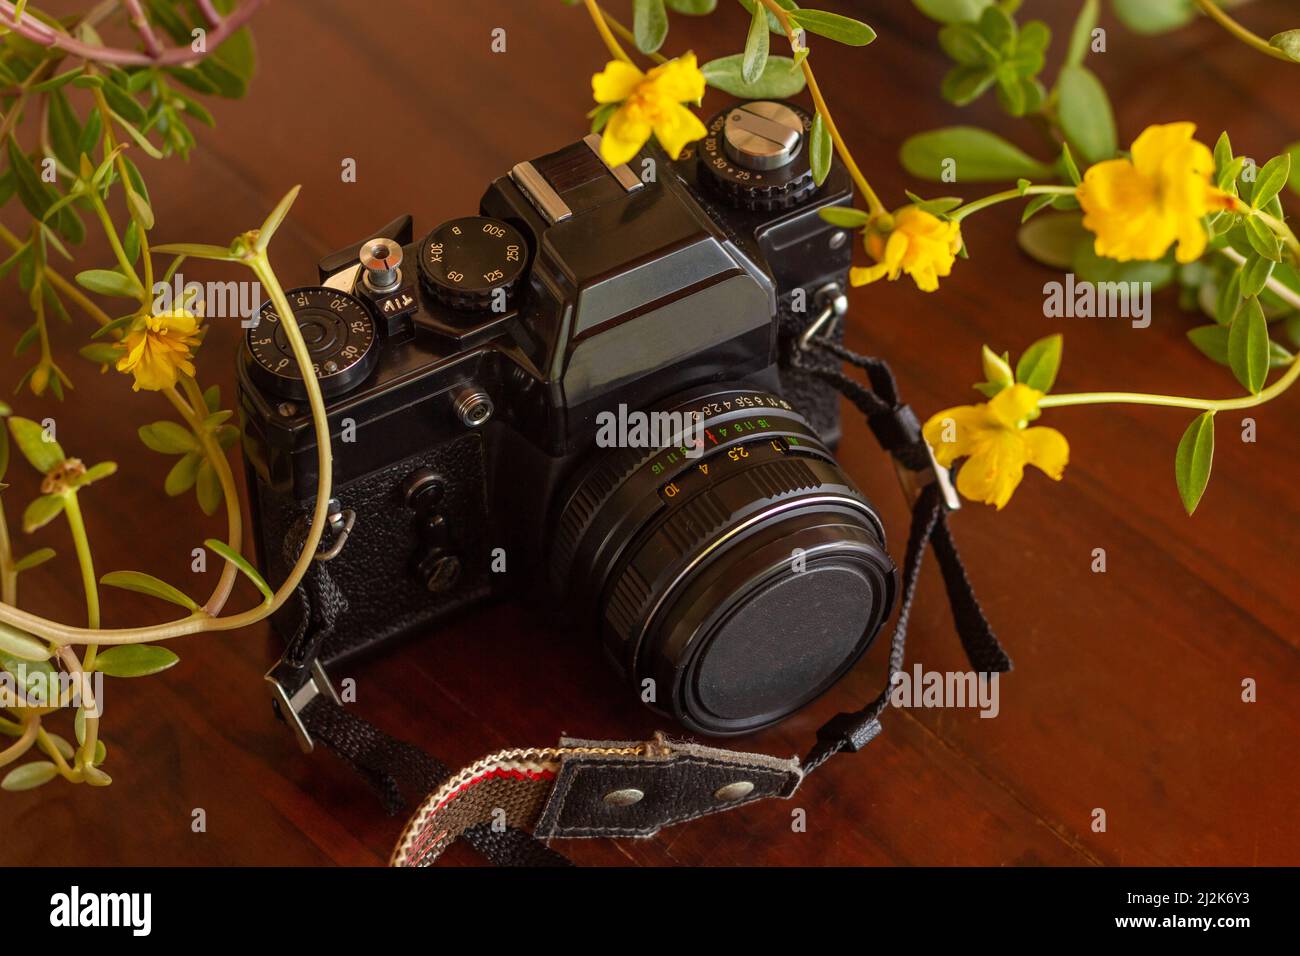 Goiânia, Goias, Brazil – April  02, 2022: A vintage photo camera among colorful flowers on a wooden table. Stock Photo